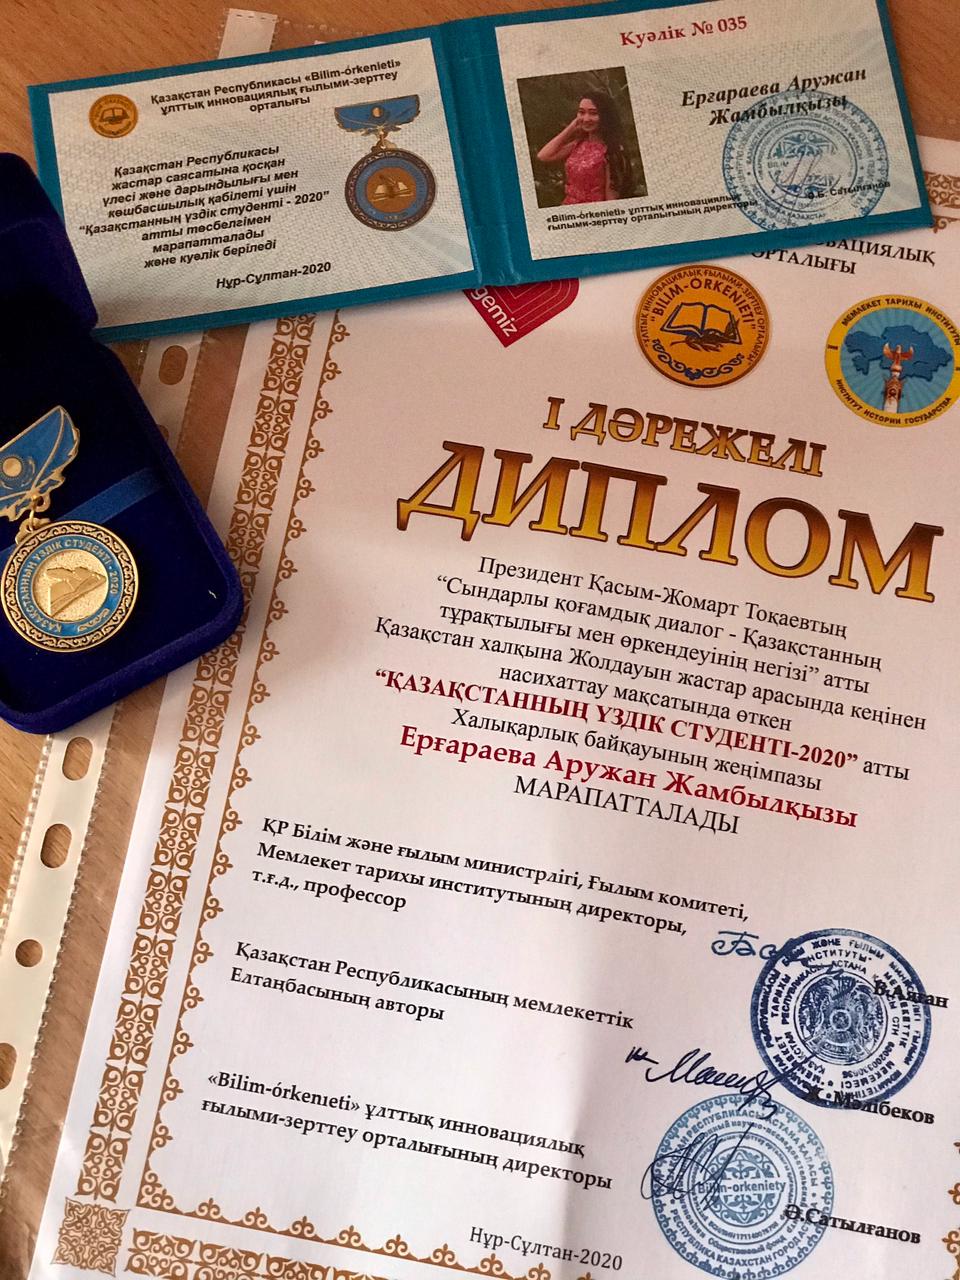 Aruzhan Ergarayeva, a student of the specialty Biotechnology, became the winner of the International Competition "The Best Student of Kazakhstan - 2020" (Diploma of the 1st degree), which was held to promote the Address of the President of Kazakhstan Kassym-Zhomart Tokayev to the people of